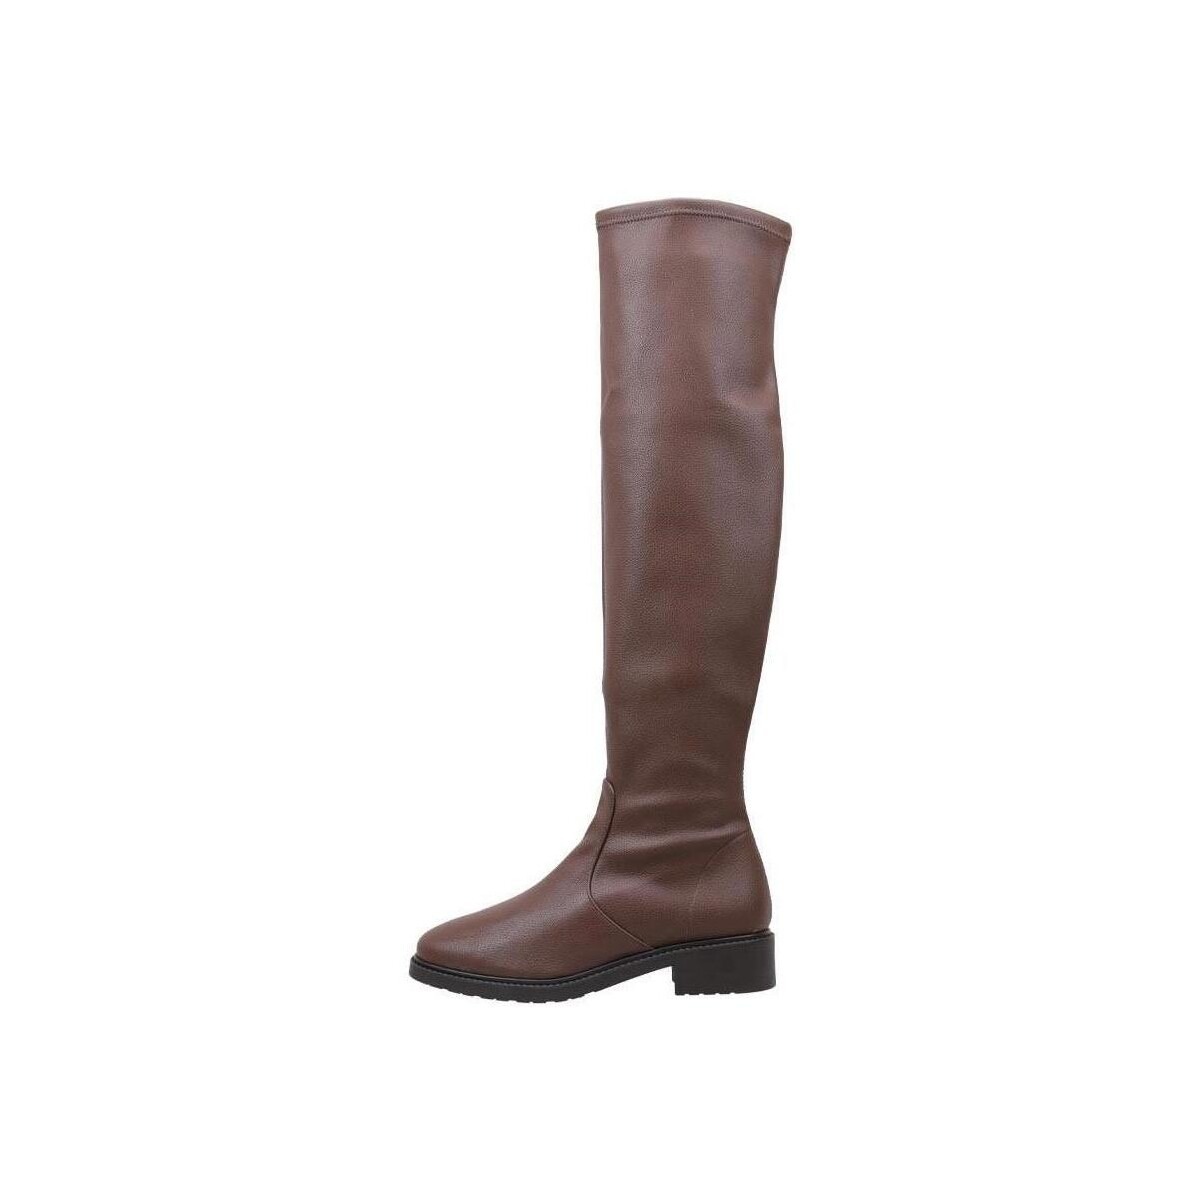 Spartoo Women's Brown Boots by Krack GOOFASH